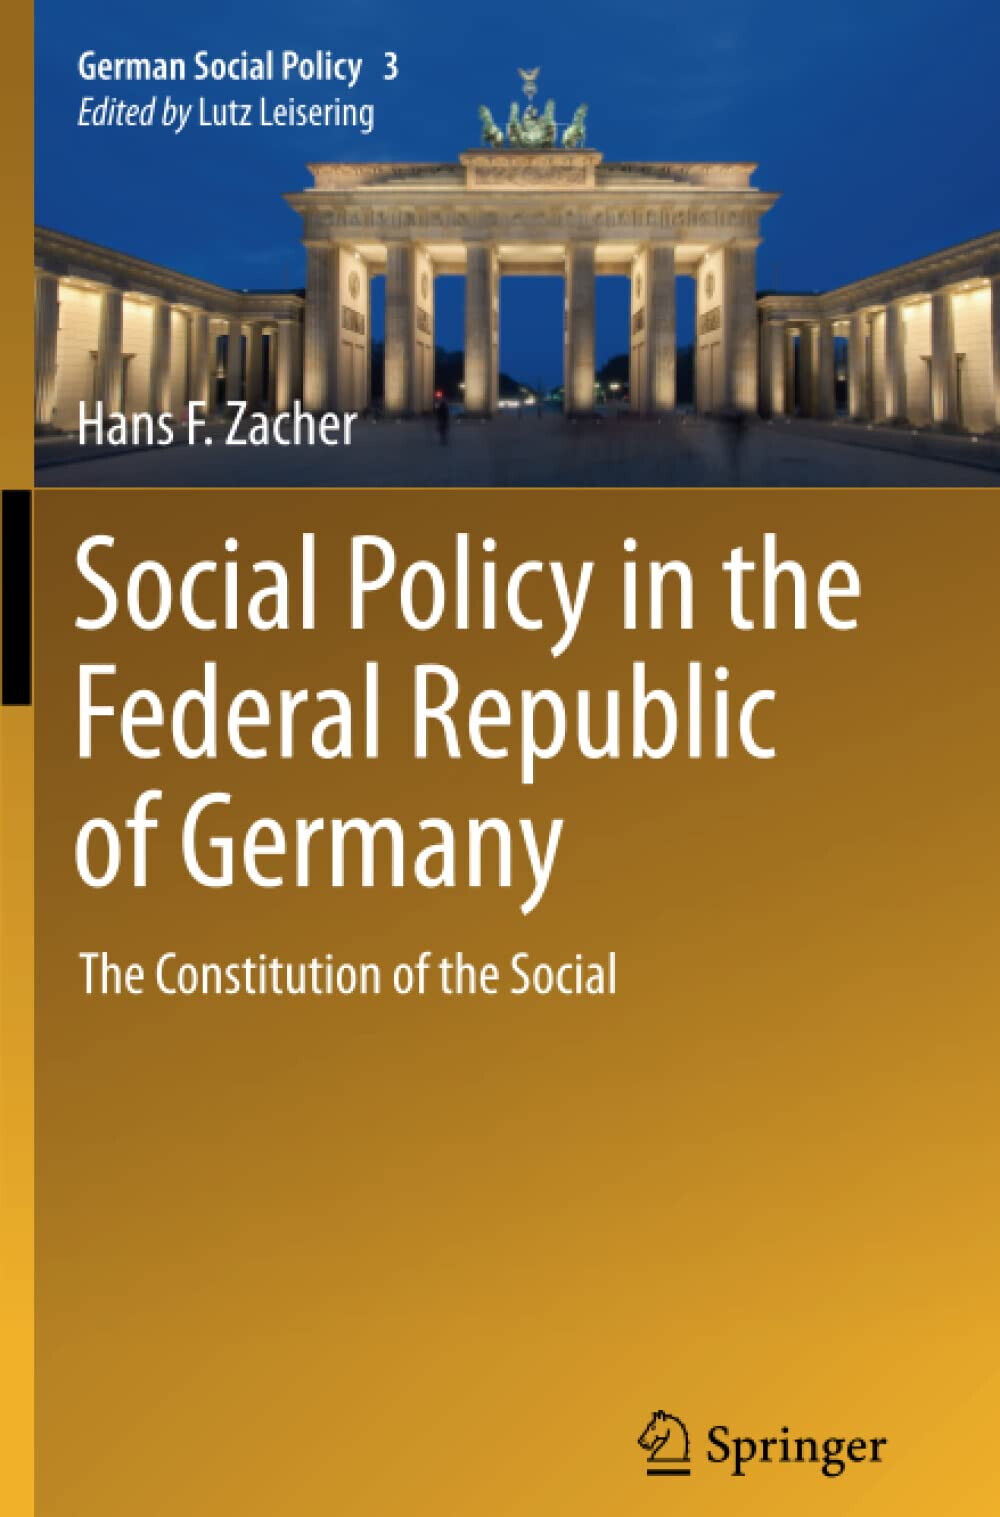 Social Policy in the Federal Republic of Germany - Hans F. Zacher - Springer